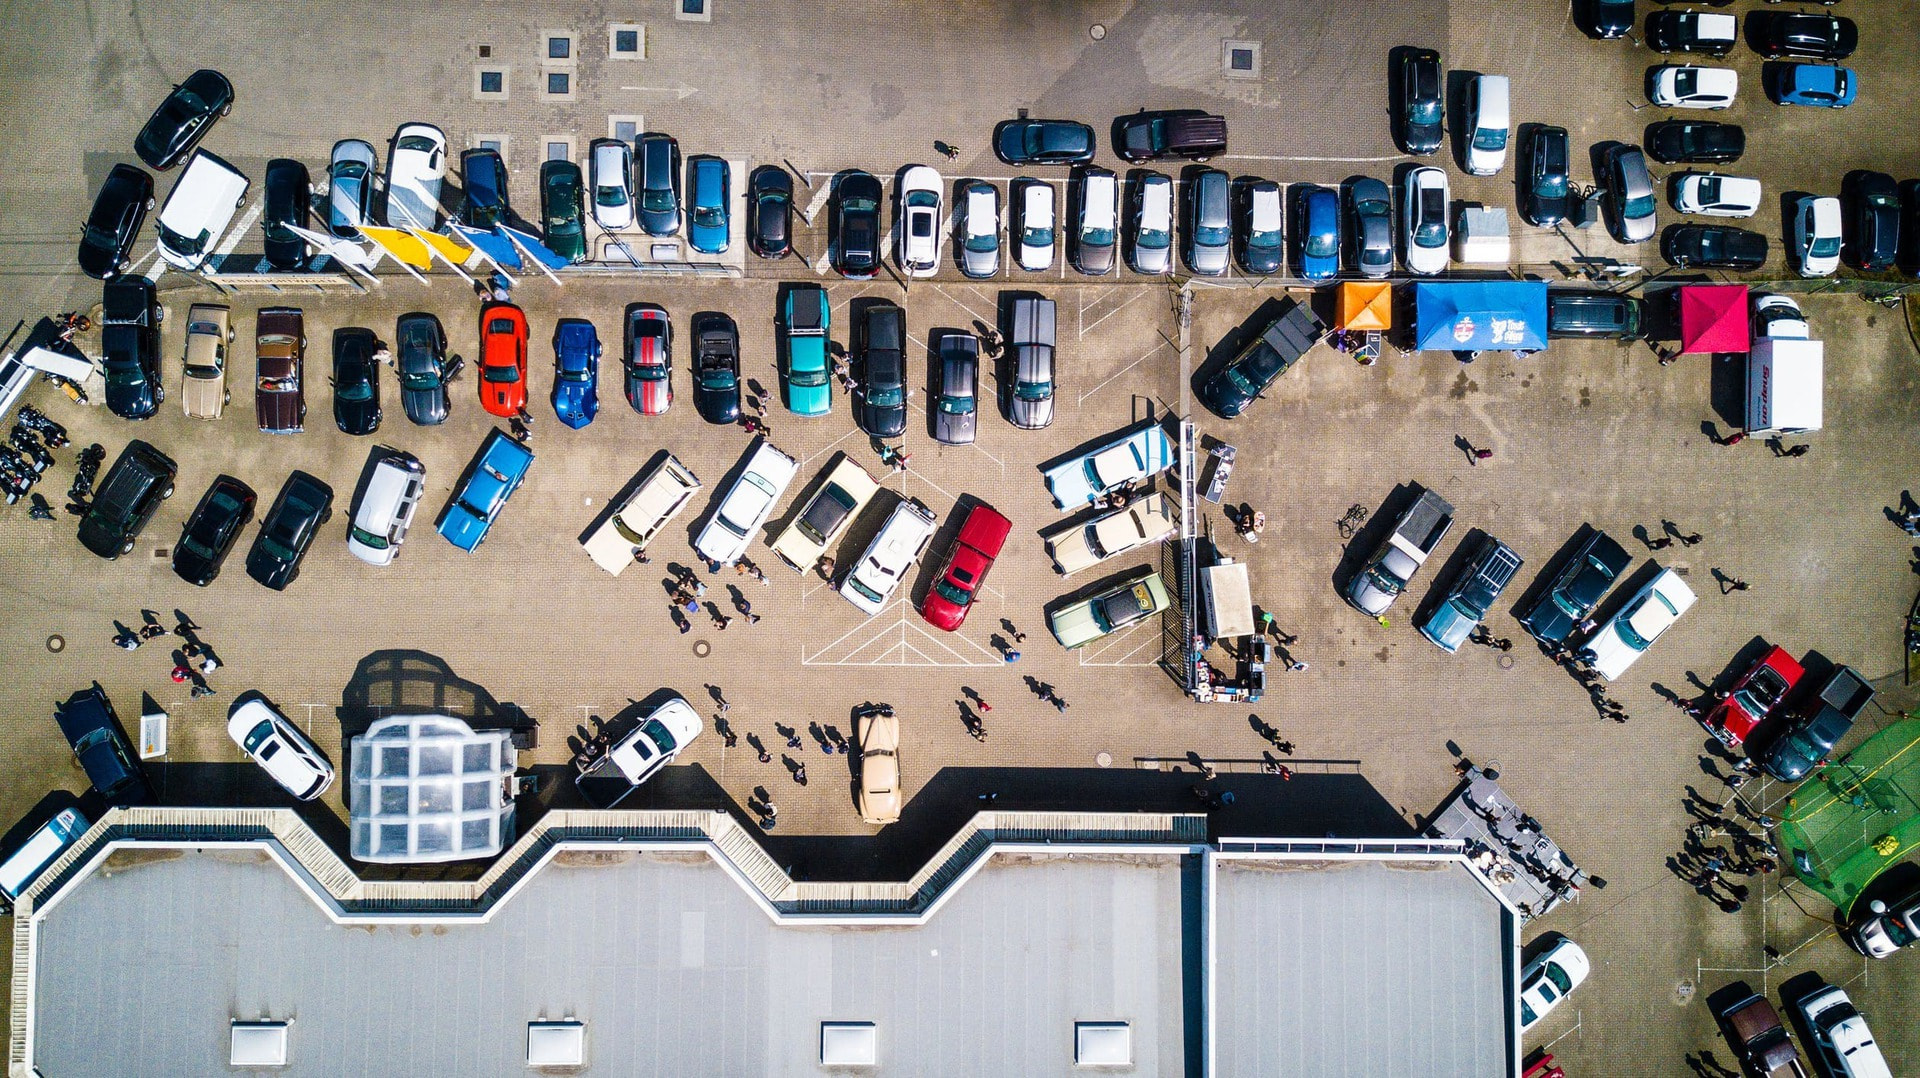 Aerial view of a chaotic parking lot